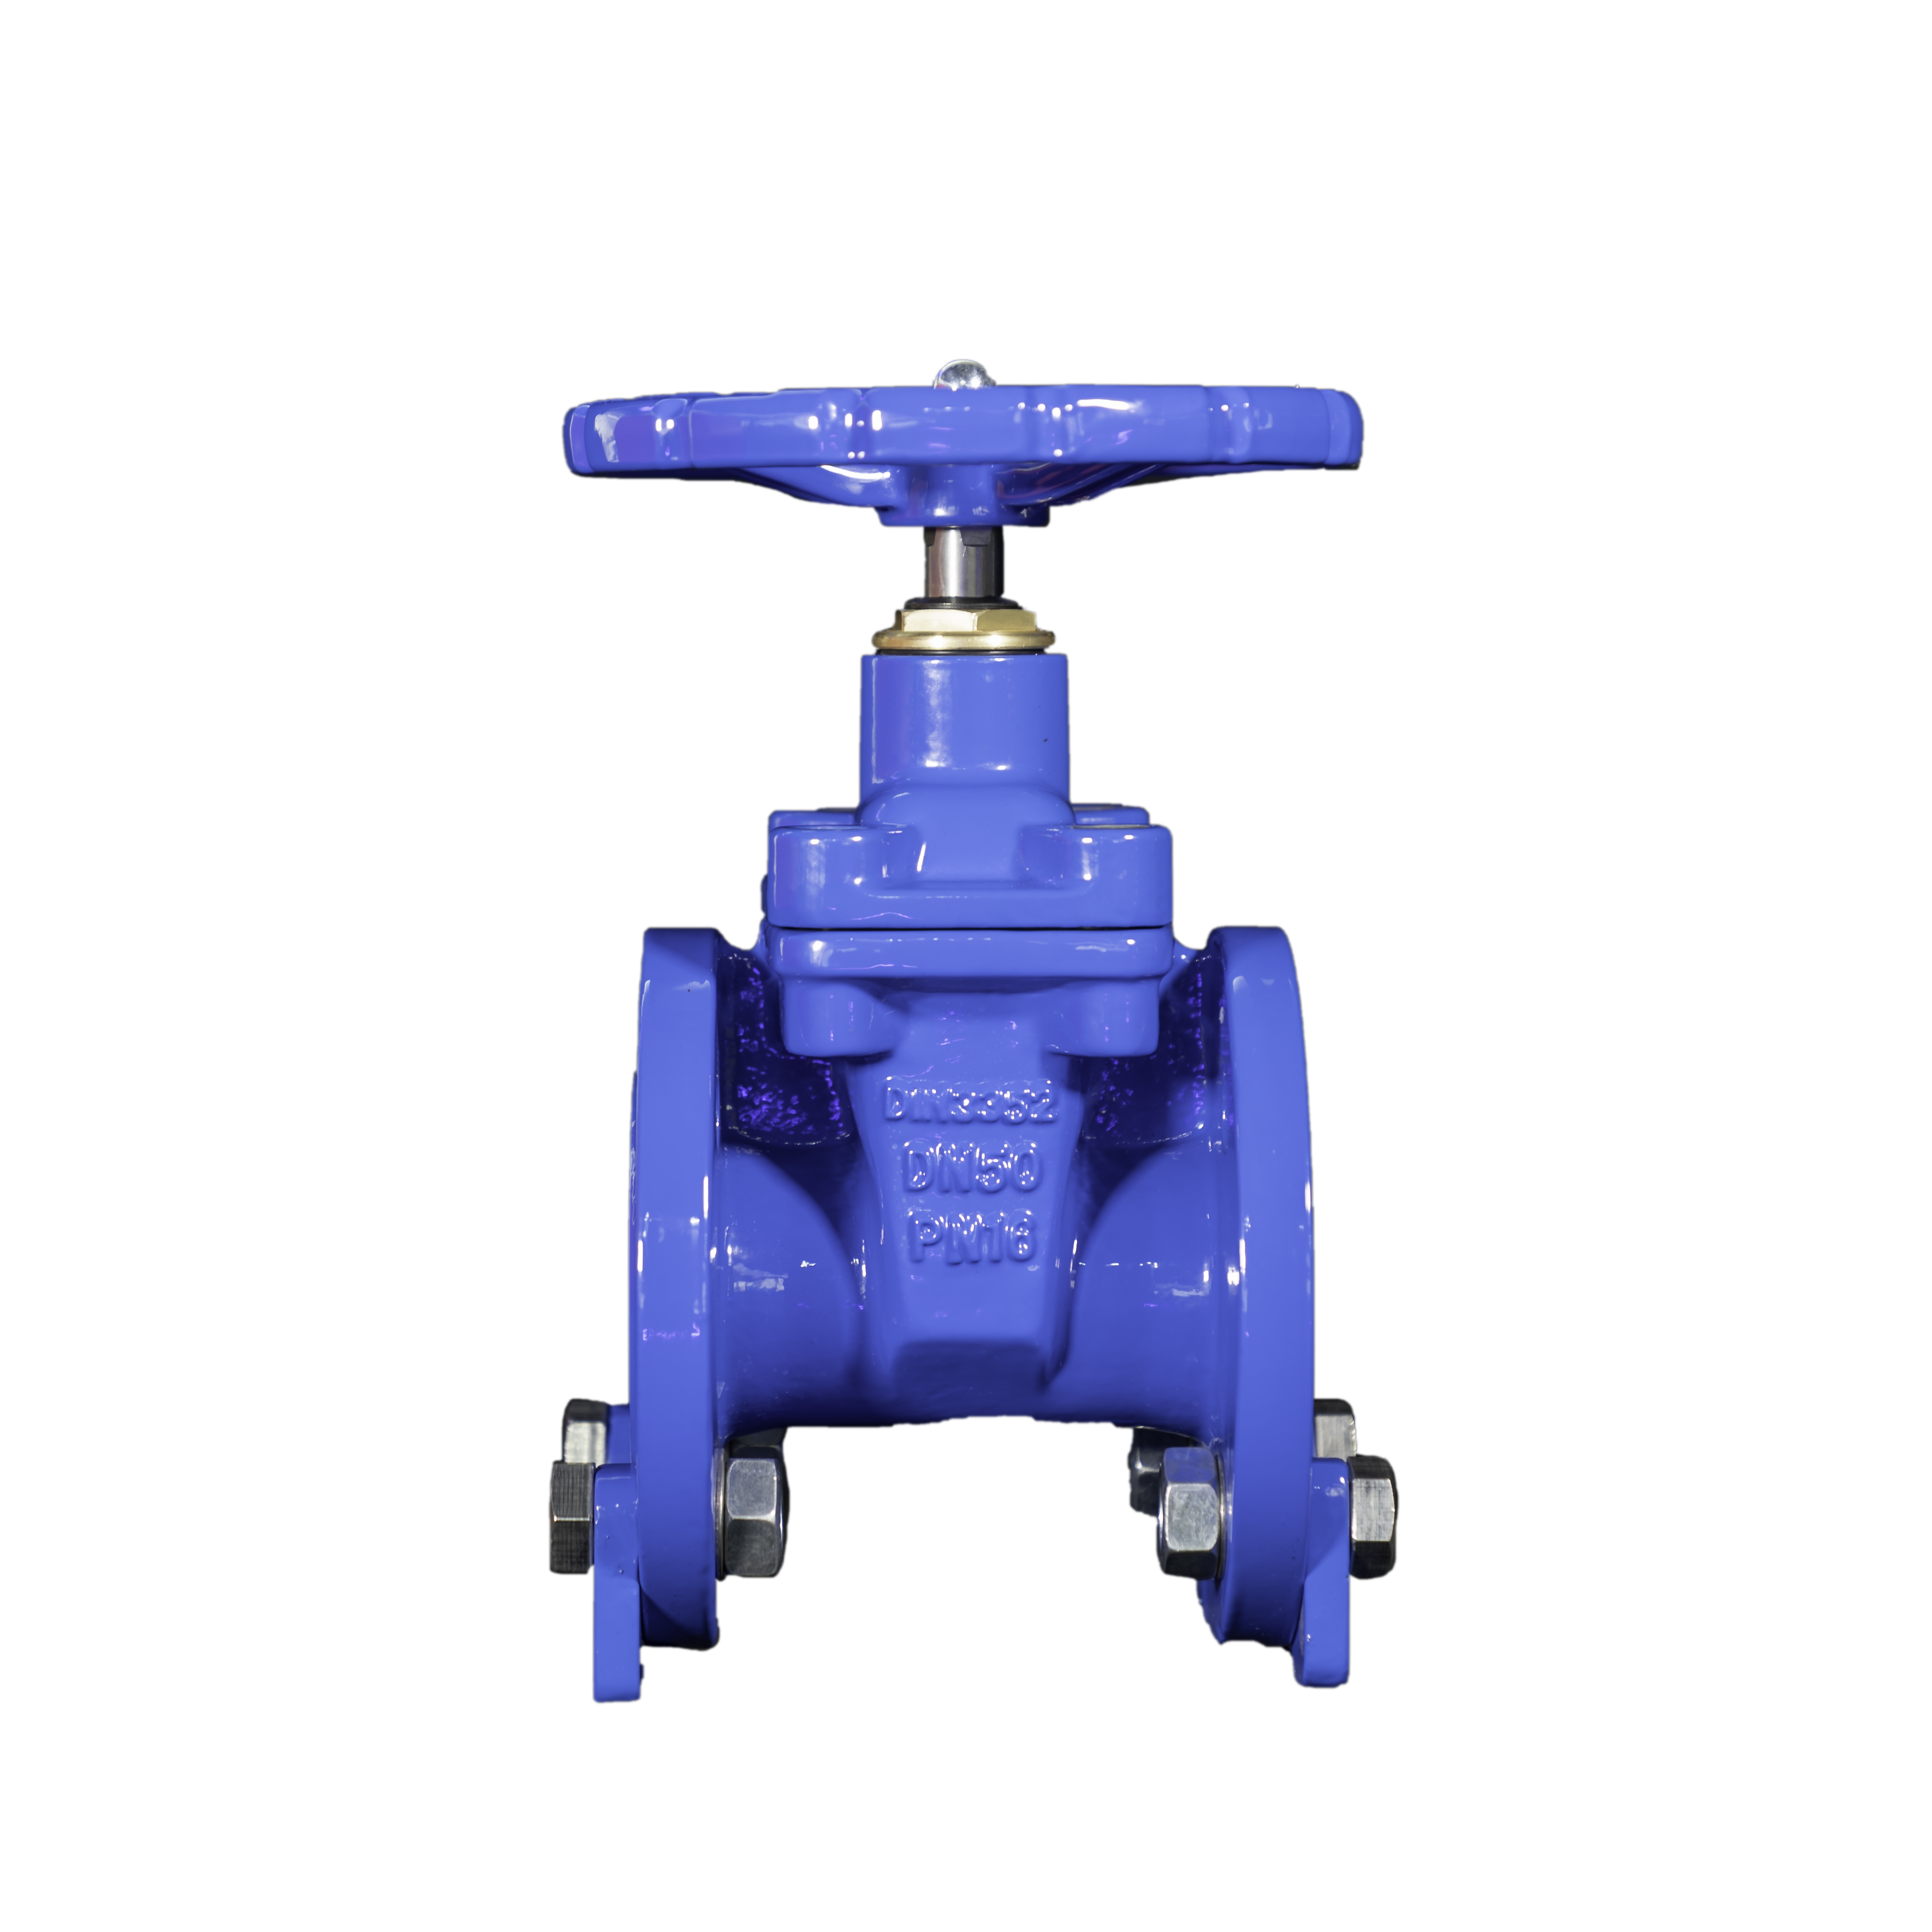 DIN 3352 Resilient seal gate valve Featured Image